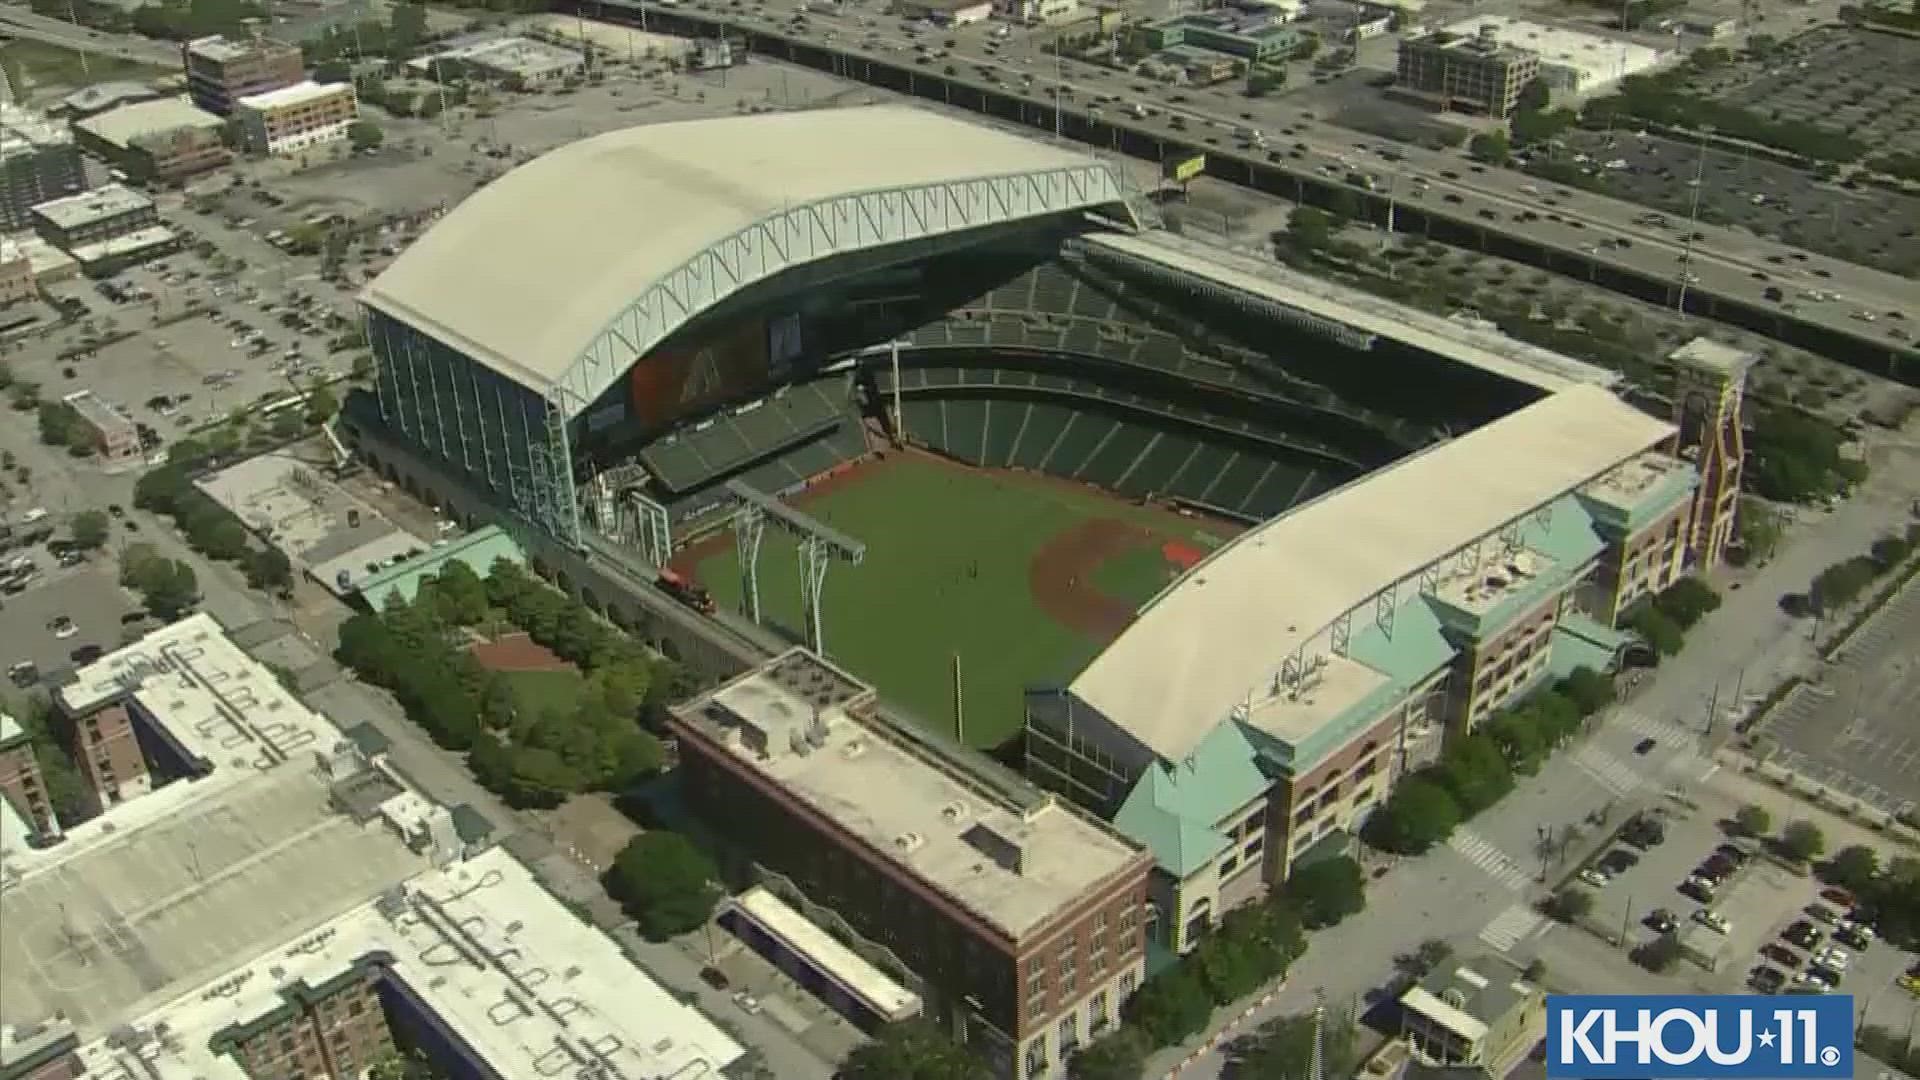 New grass was laid at Minute Maid Park ahead of the Astros' final homestand of the 2022 regular season.